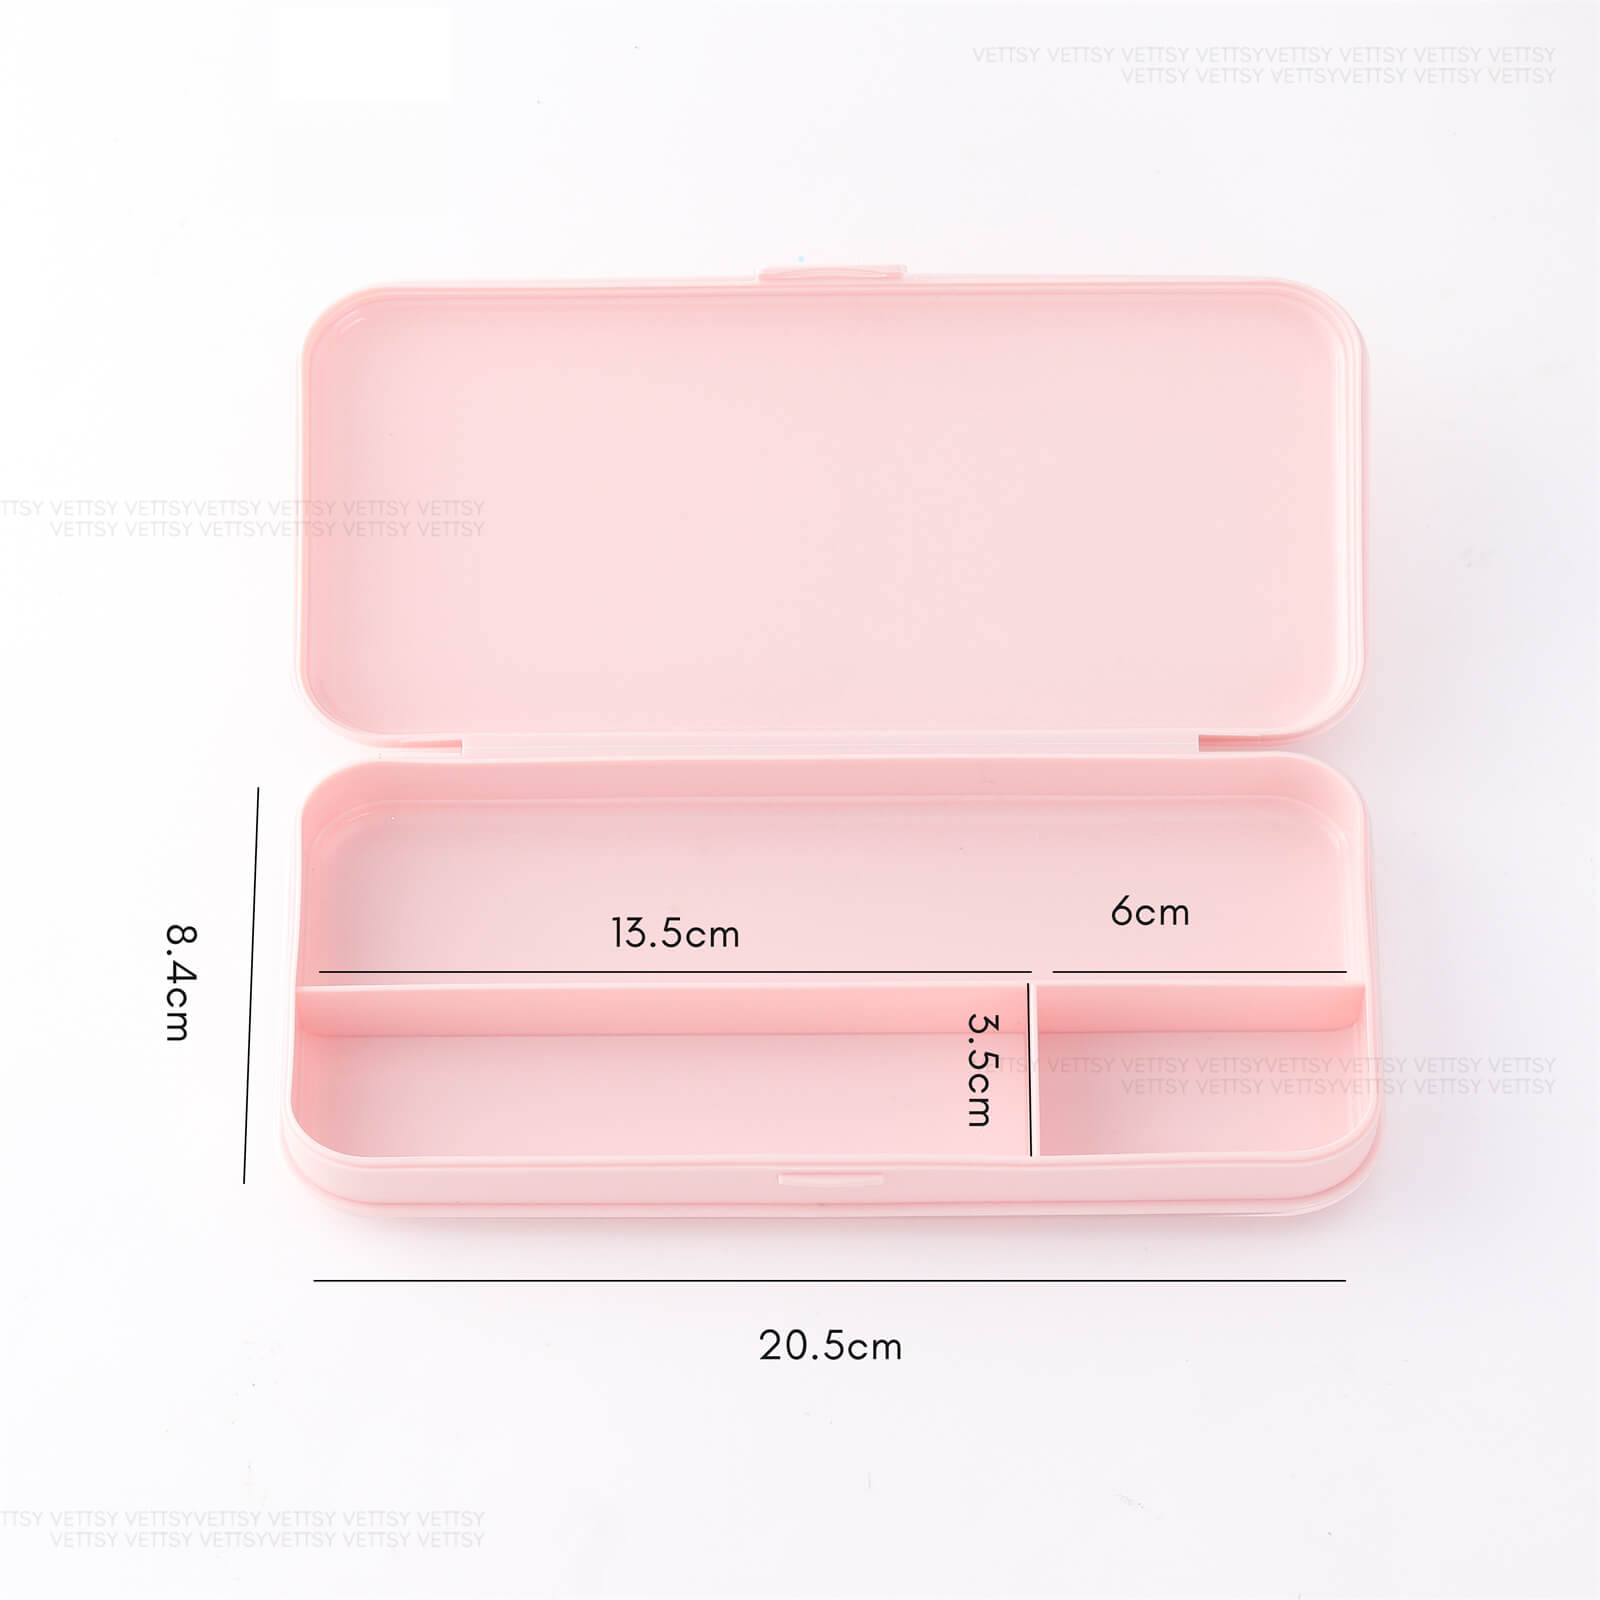 Nail Tools Storage Box With Large Capacity & Multiple Layers